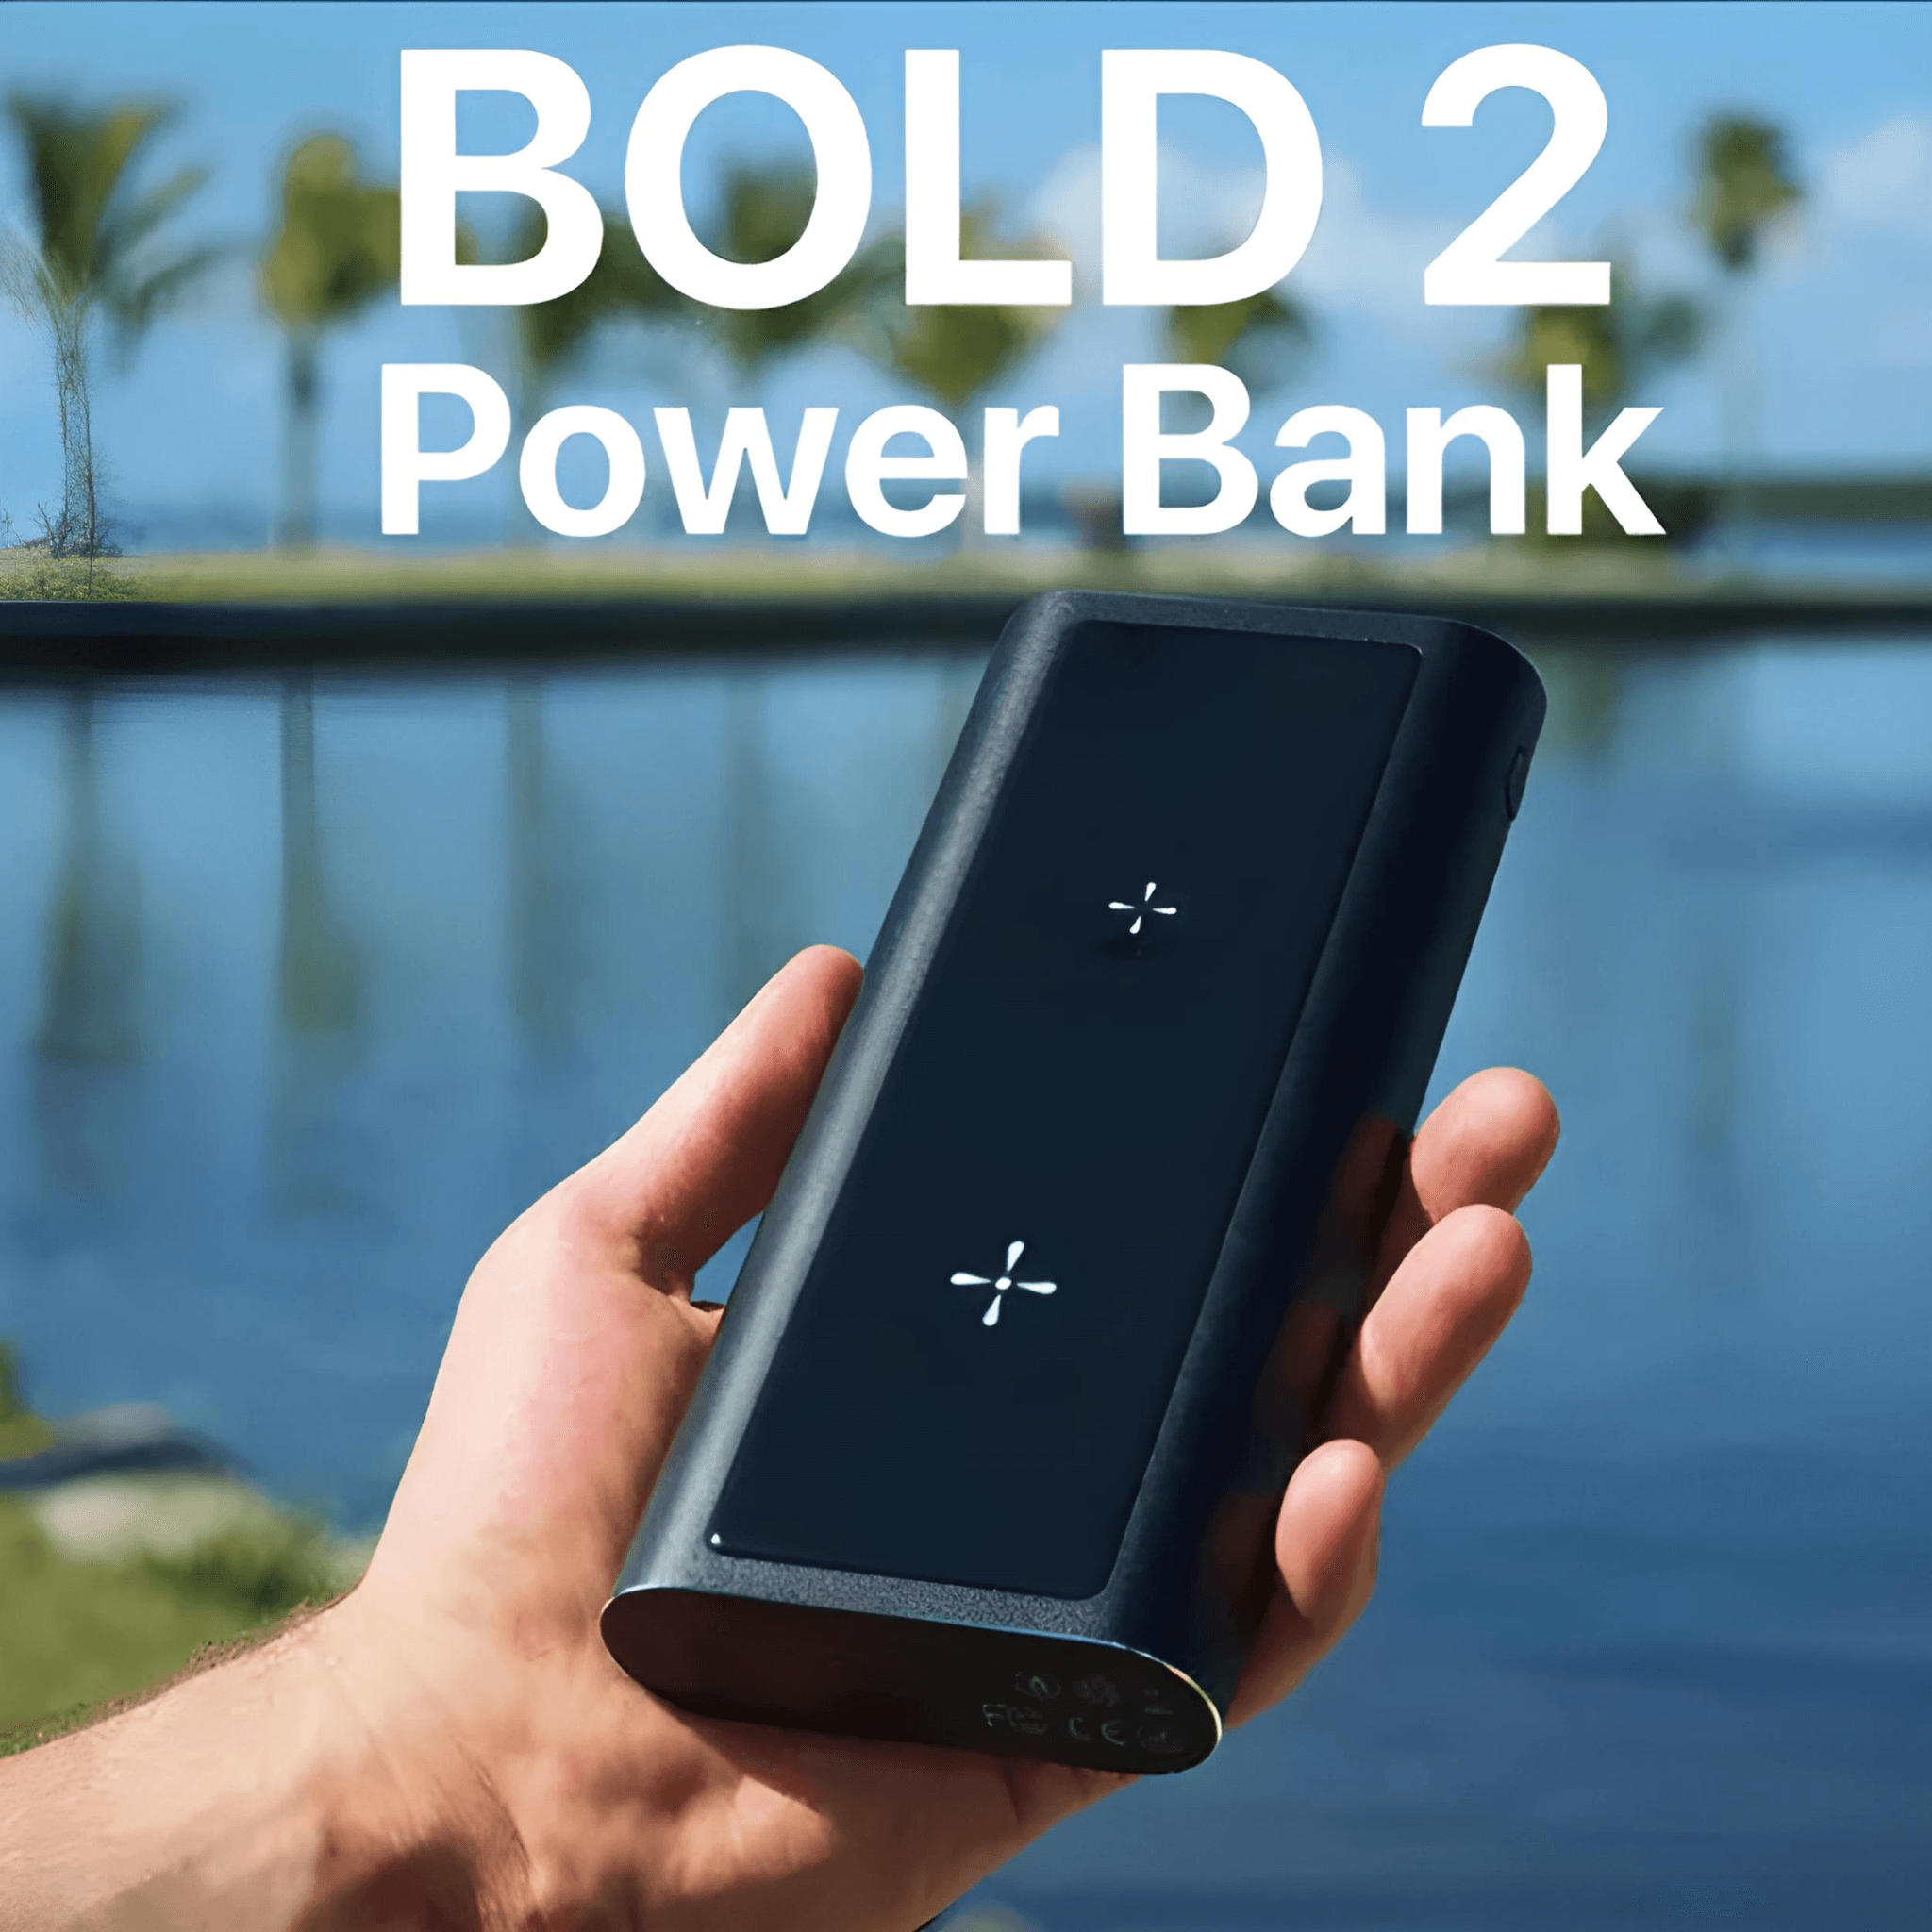 UZE launches crowdfunding campaign for BOLD 2, the world’s fastest power bank, setting out to revolutionize portable charging - UZE